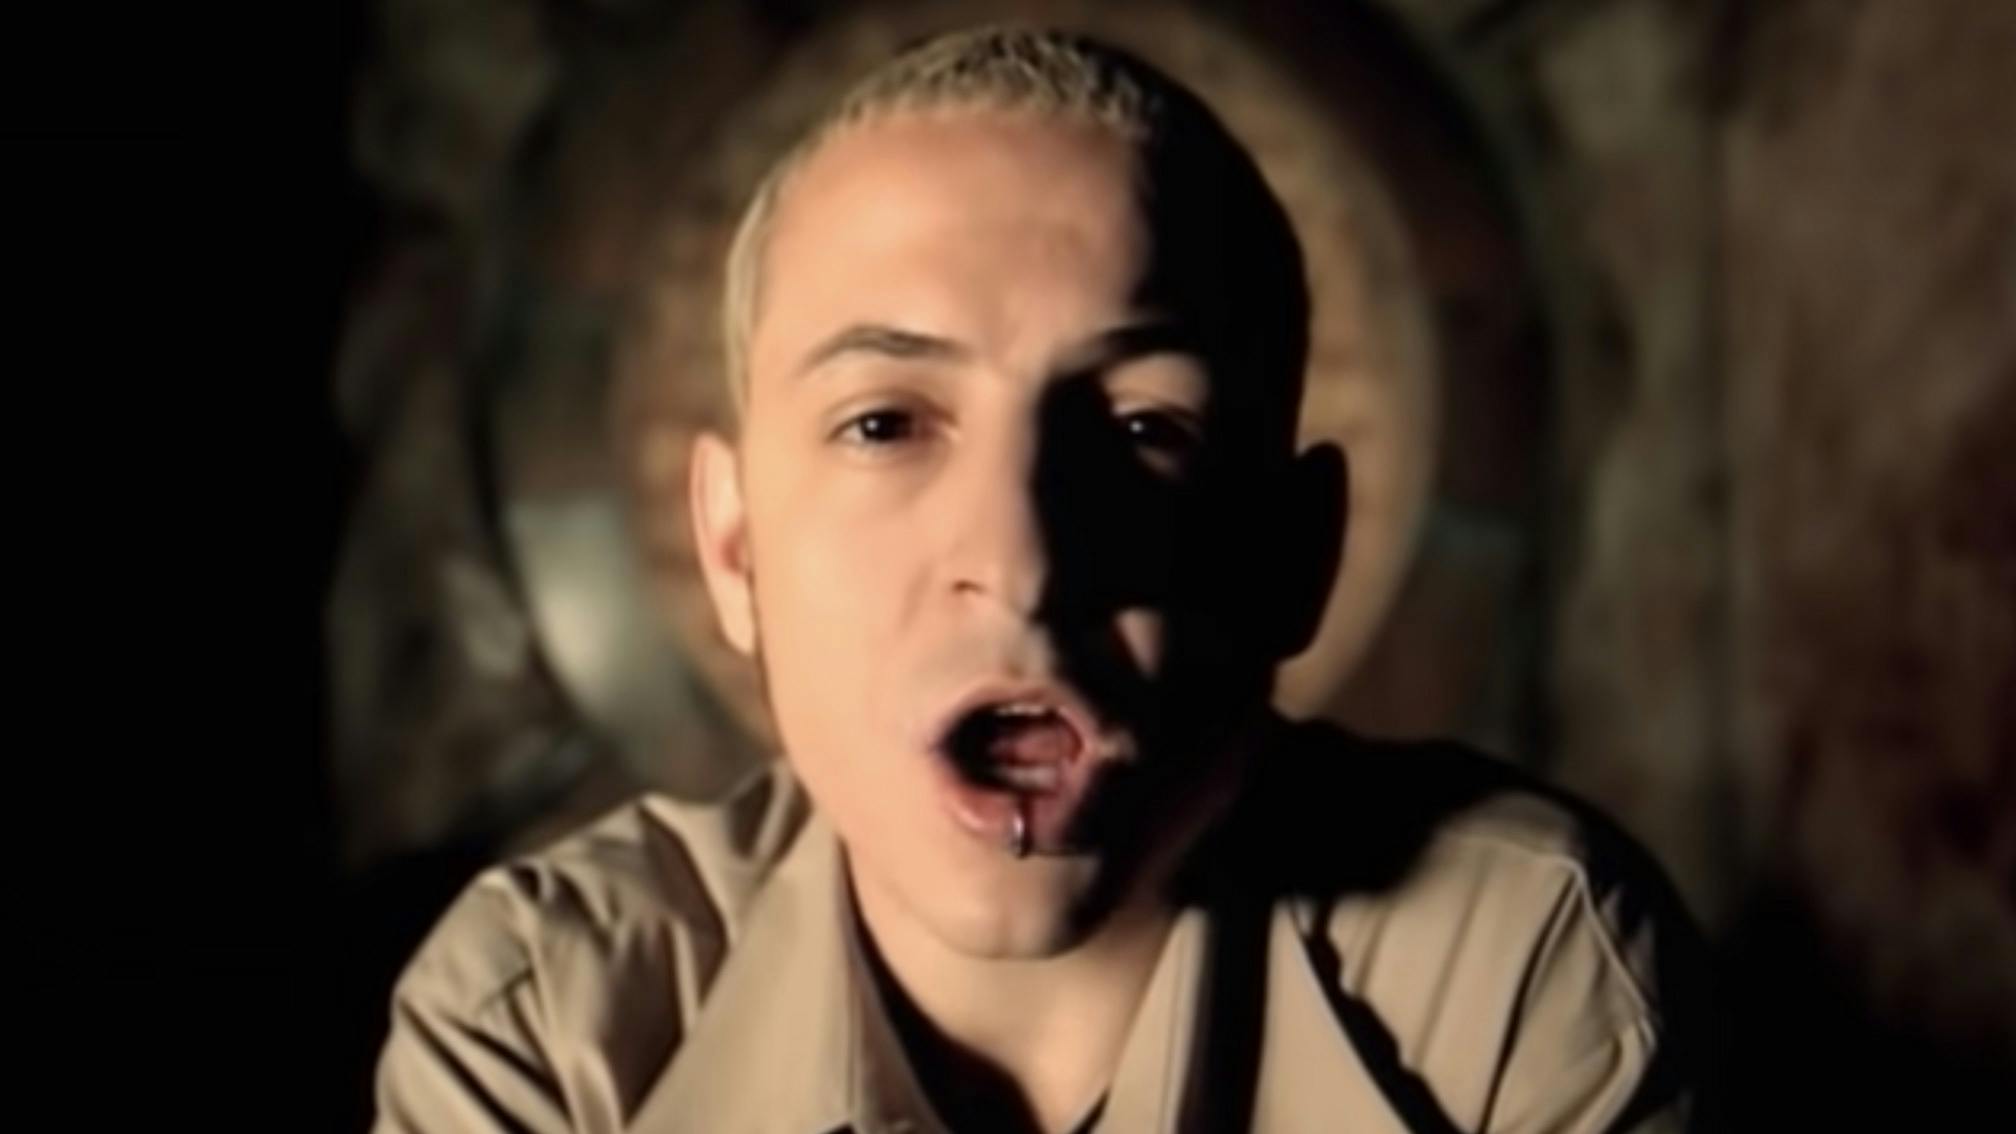 Linkin Park’s In the End Video Surpasses One Billion Views On YouTube